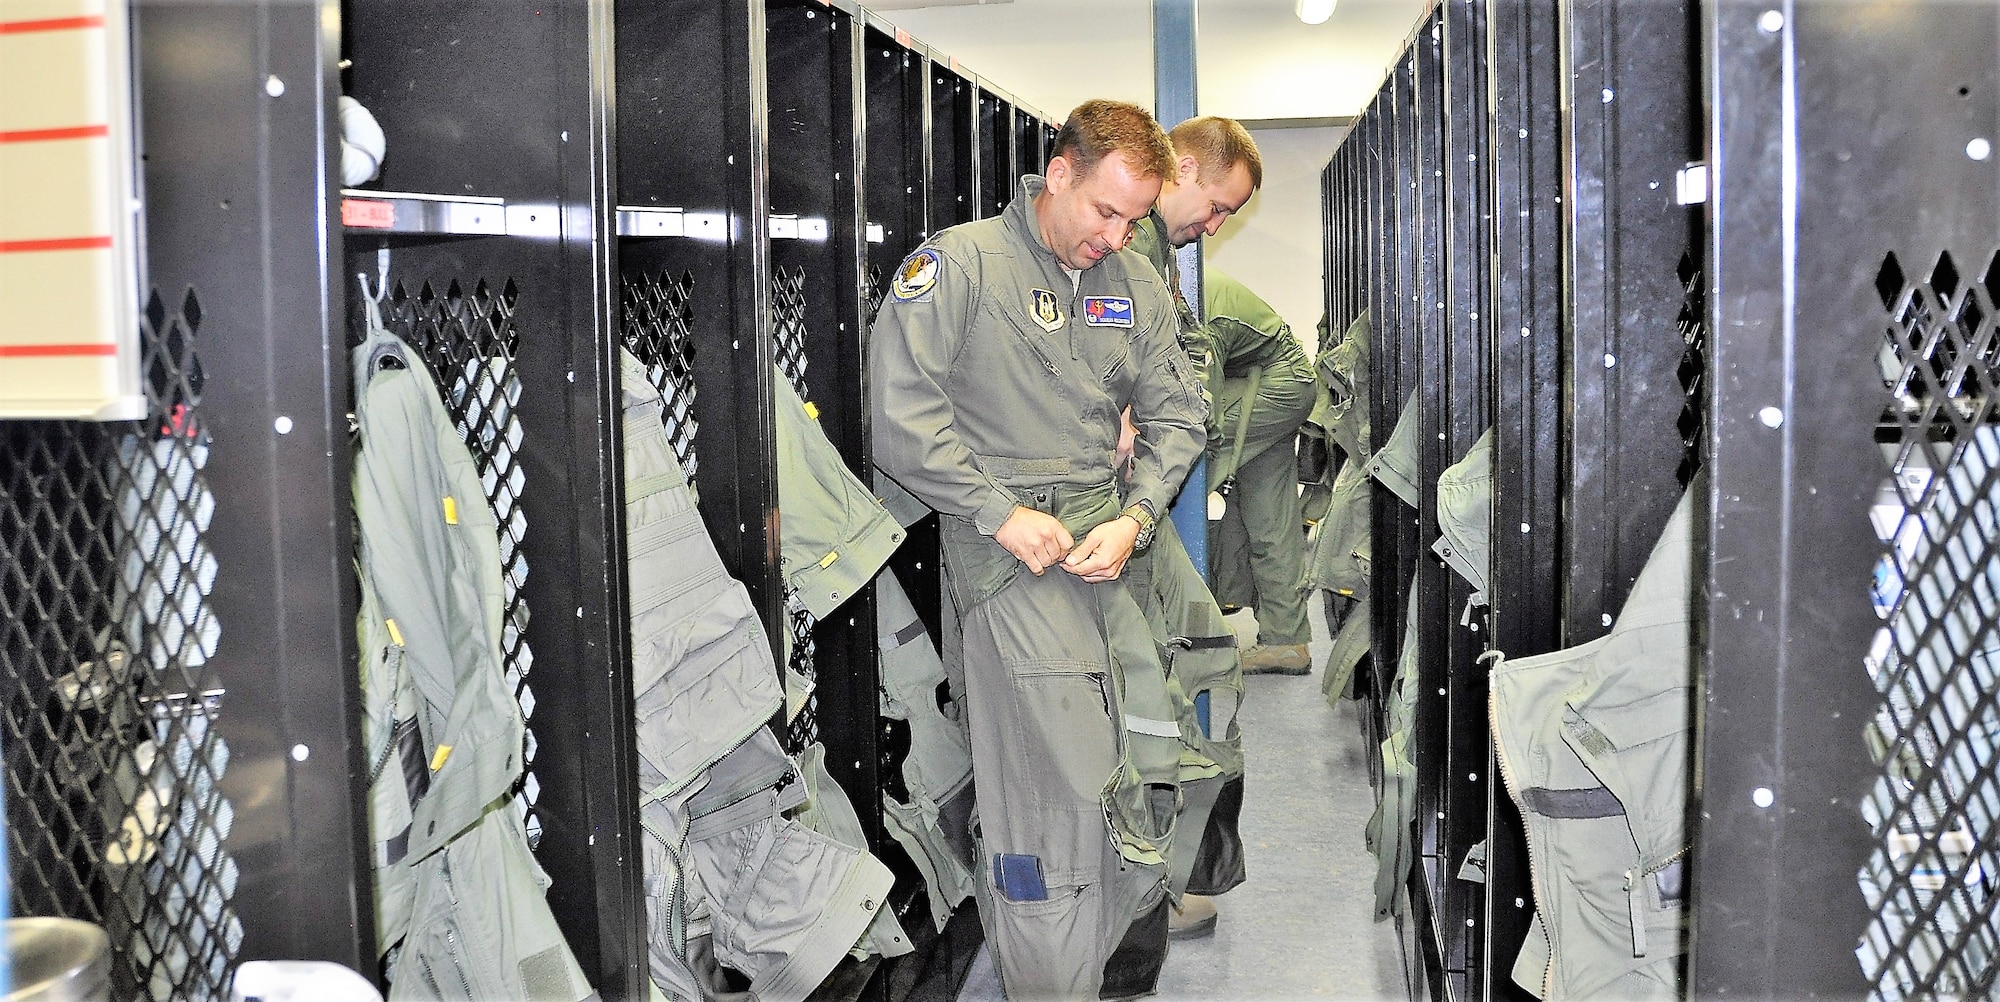 39th FTS Cobras get ready for flight by donning their anti-G suits. (U.S. Air Force photo by Janis El Shabazz)